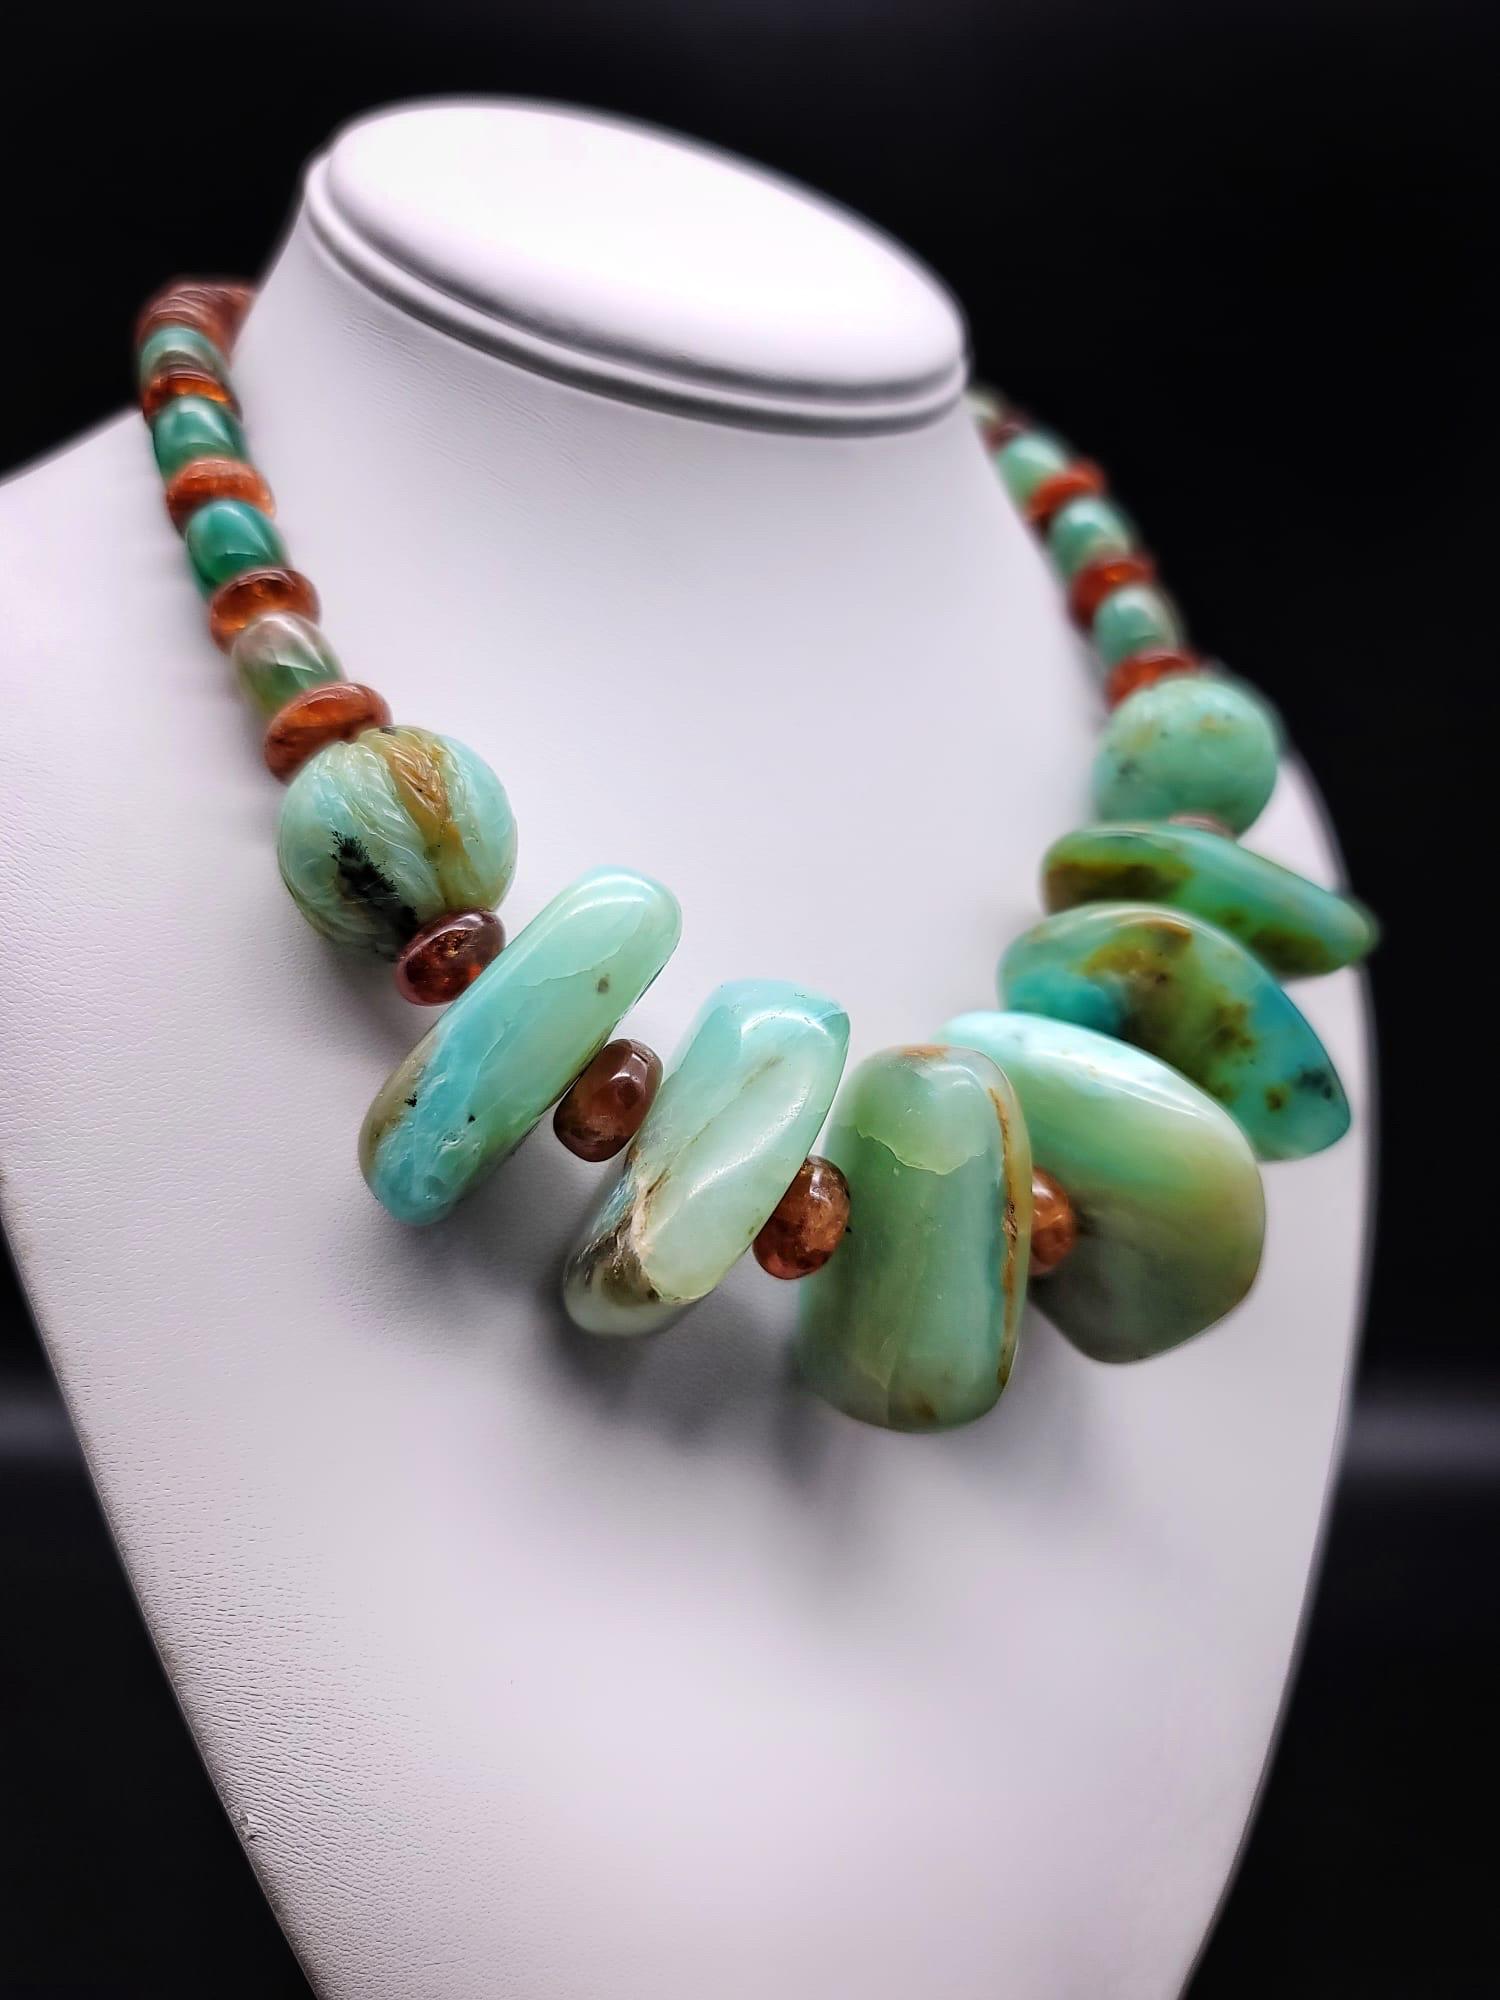 One-of-a-Kind

Magnificent Peruvian opal necklace, each of the six polished center stones is a large polished specimen in a different shade. The opals are separated by hessonite ( brown garnets)rondels., a  translucent stone that mimics the color of